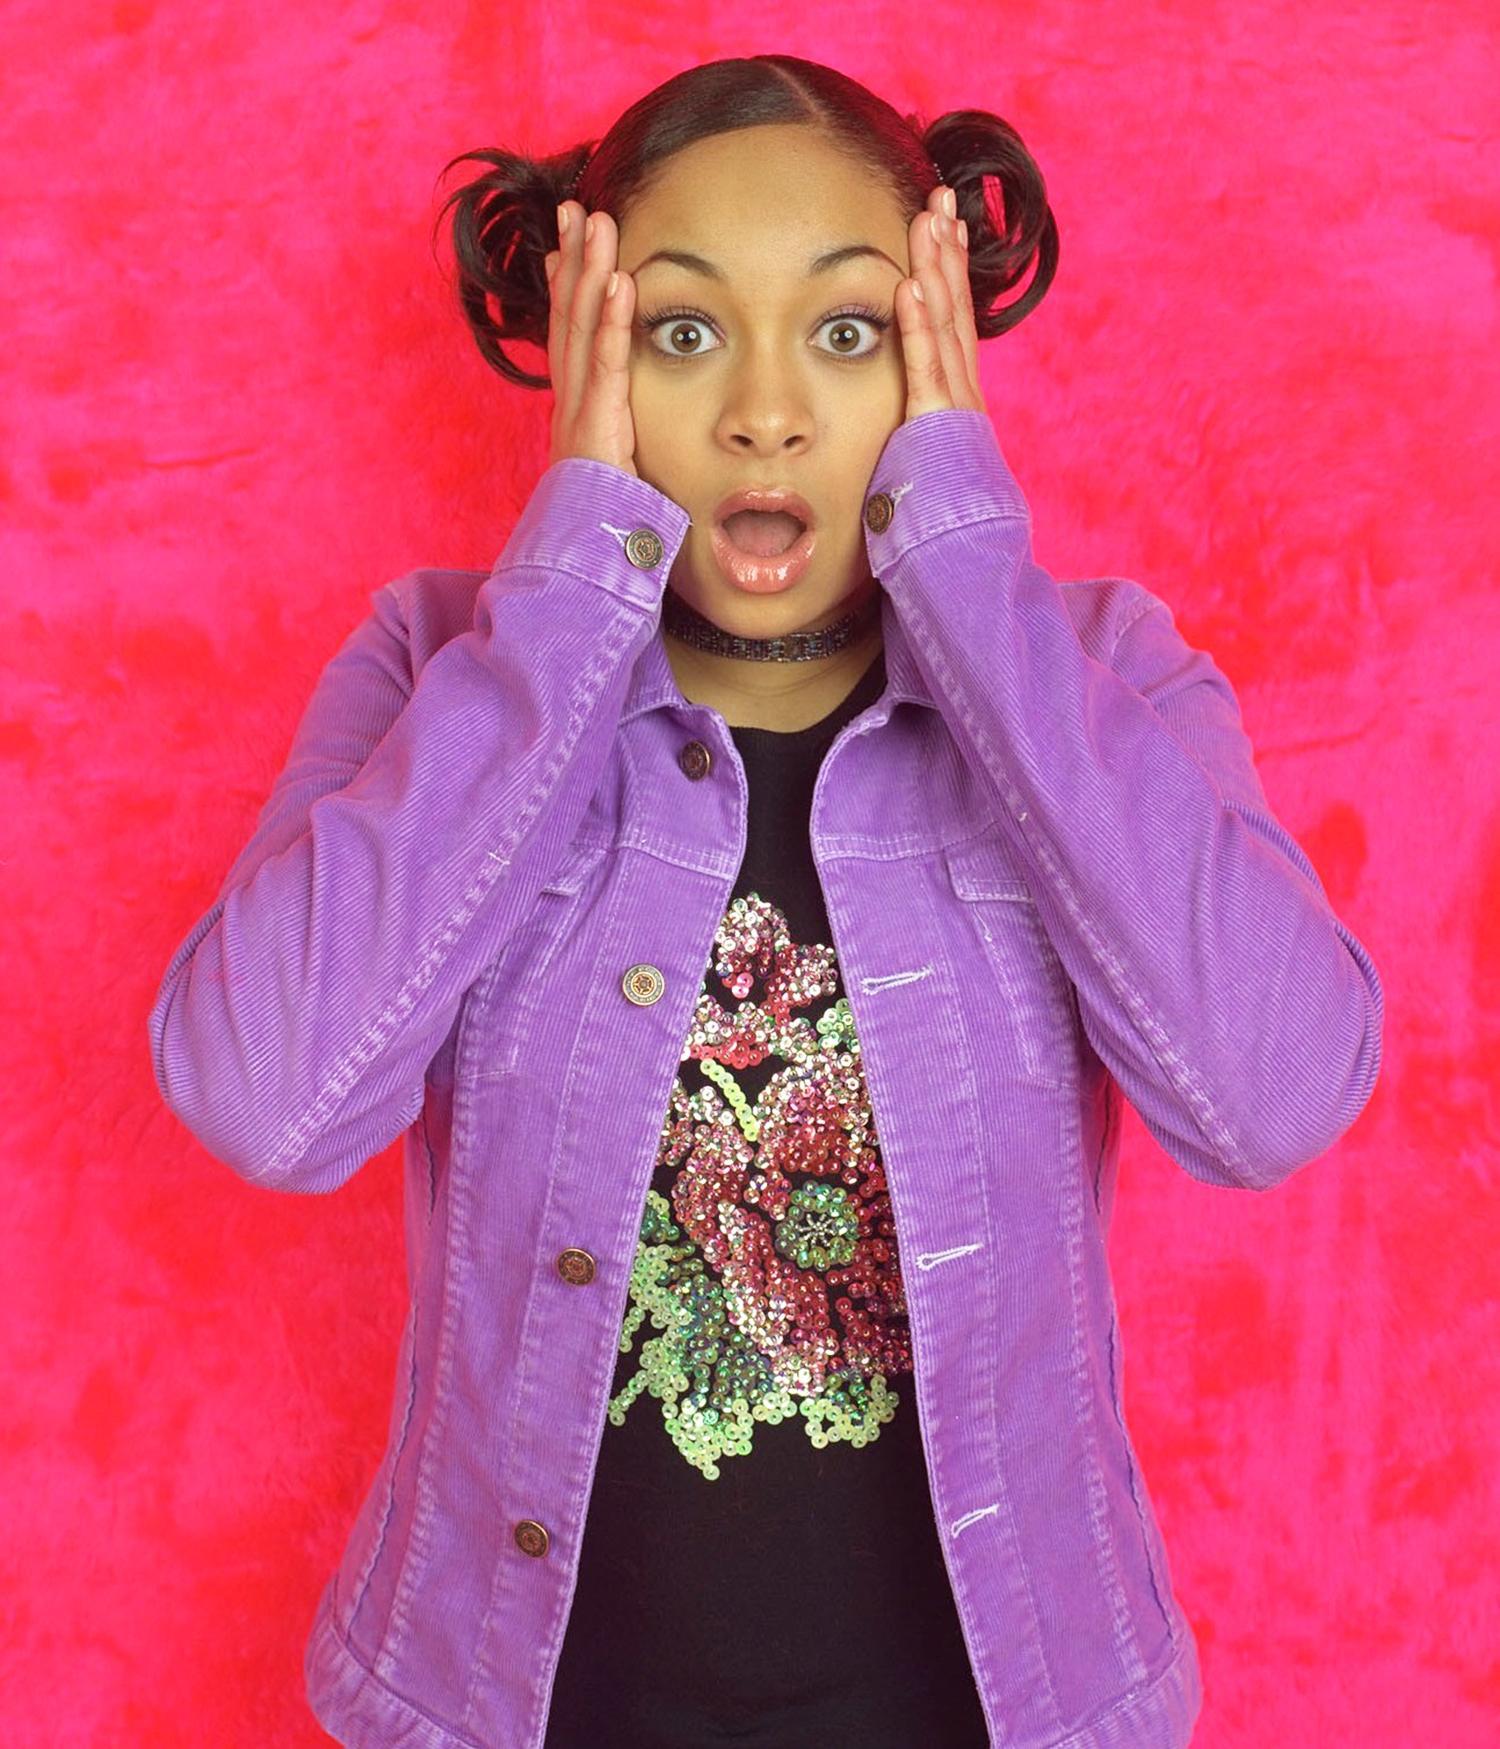 Raven Symone Exiting 'The View' For 'That's So Raven' Reboot